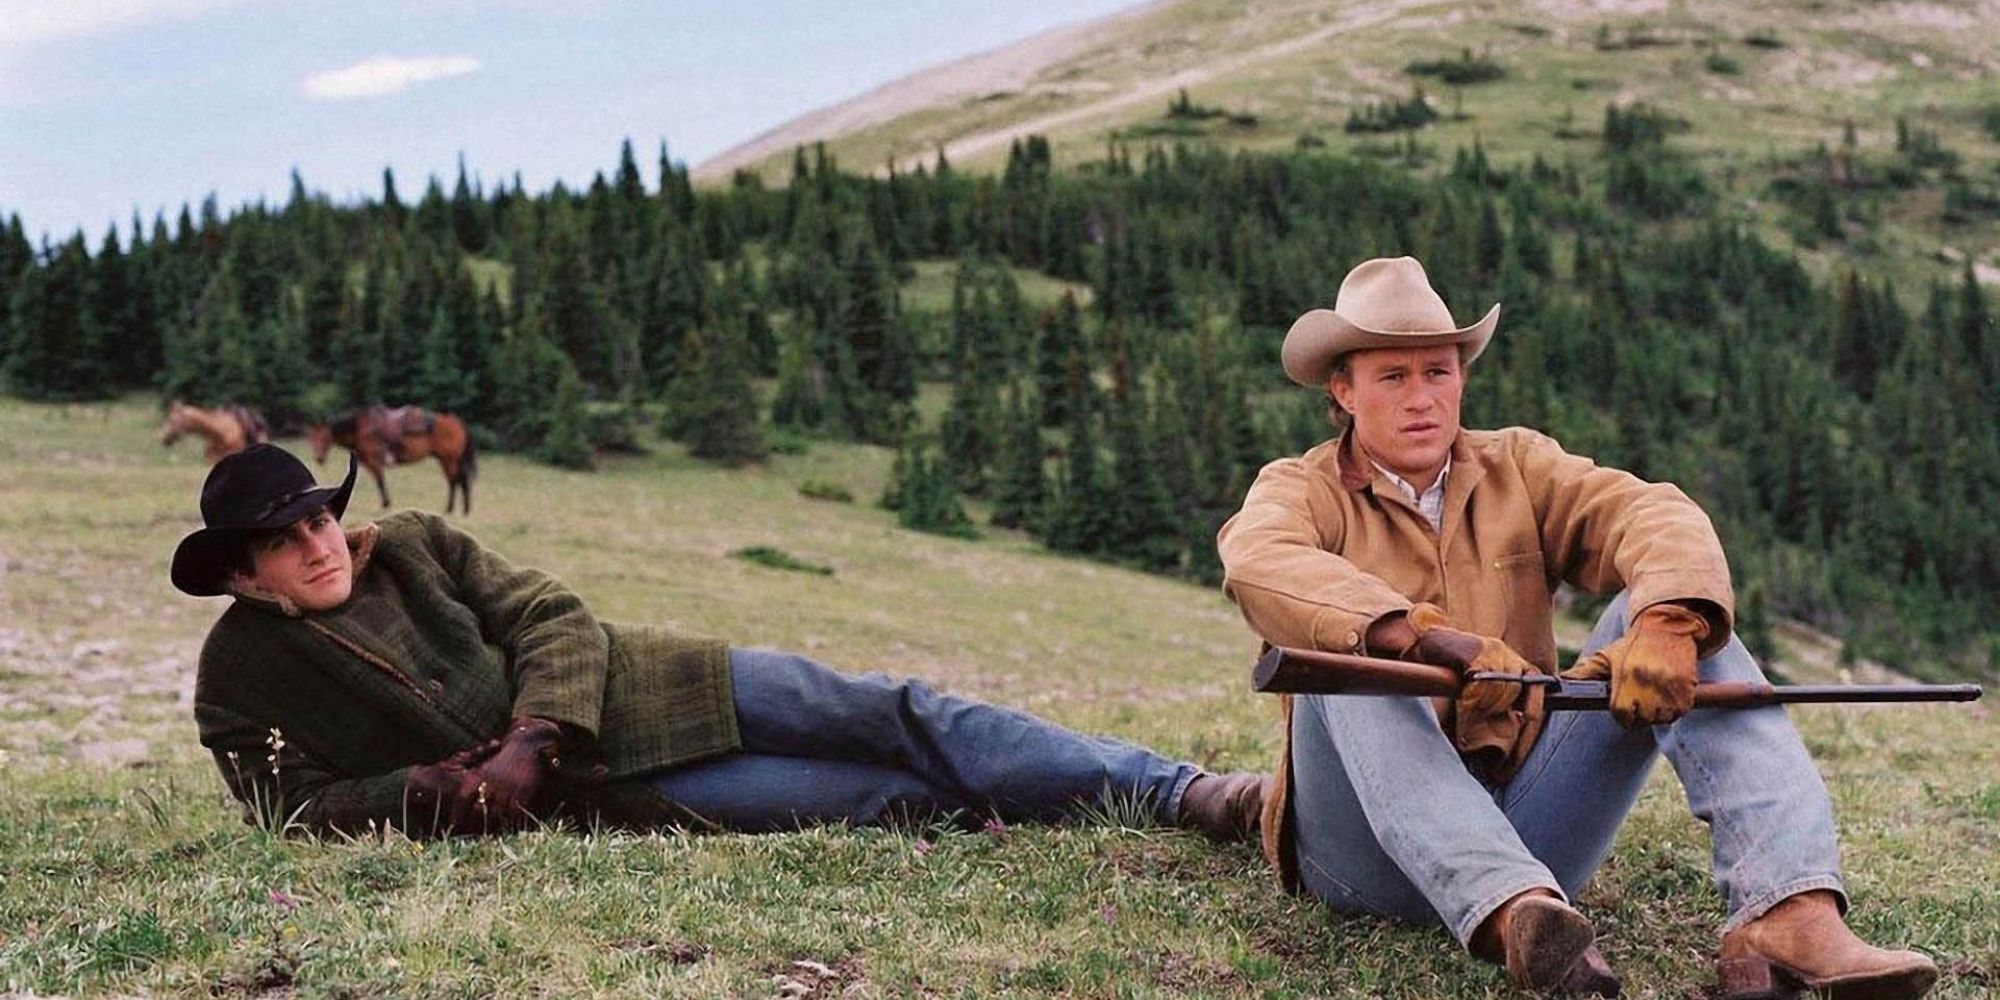 Two cowboys sitting on the grass together